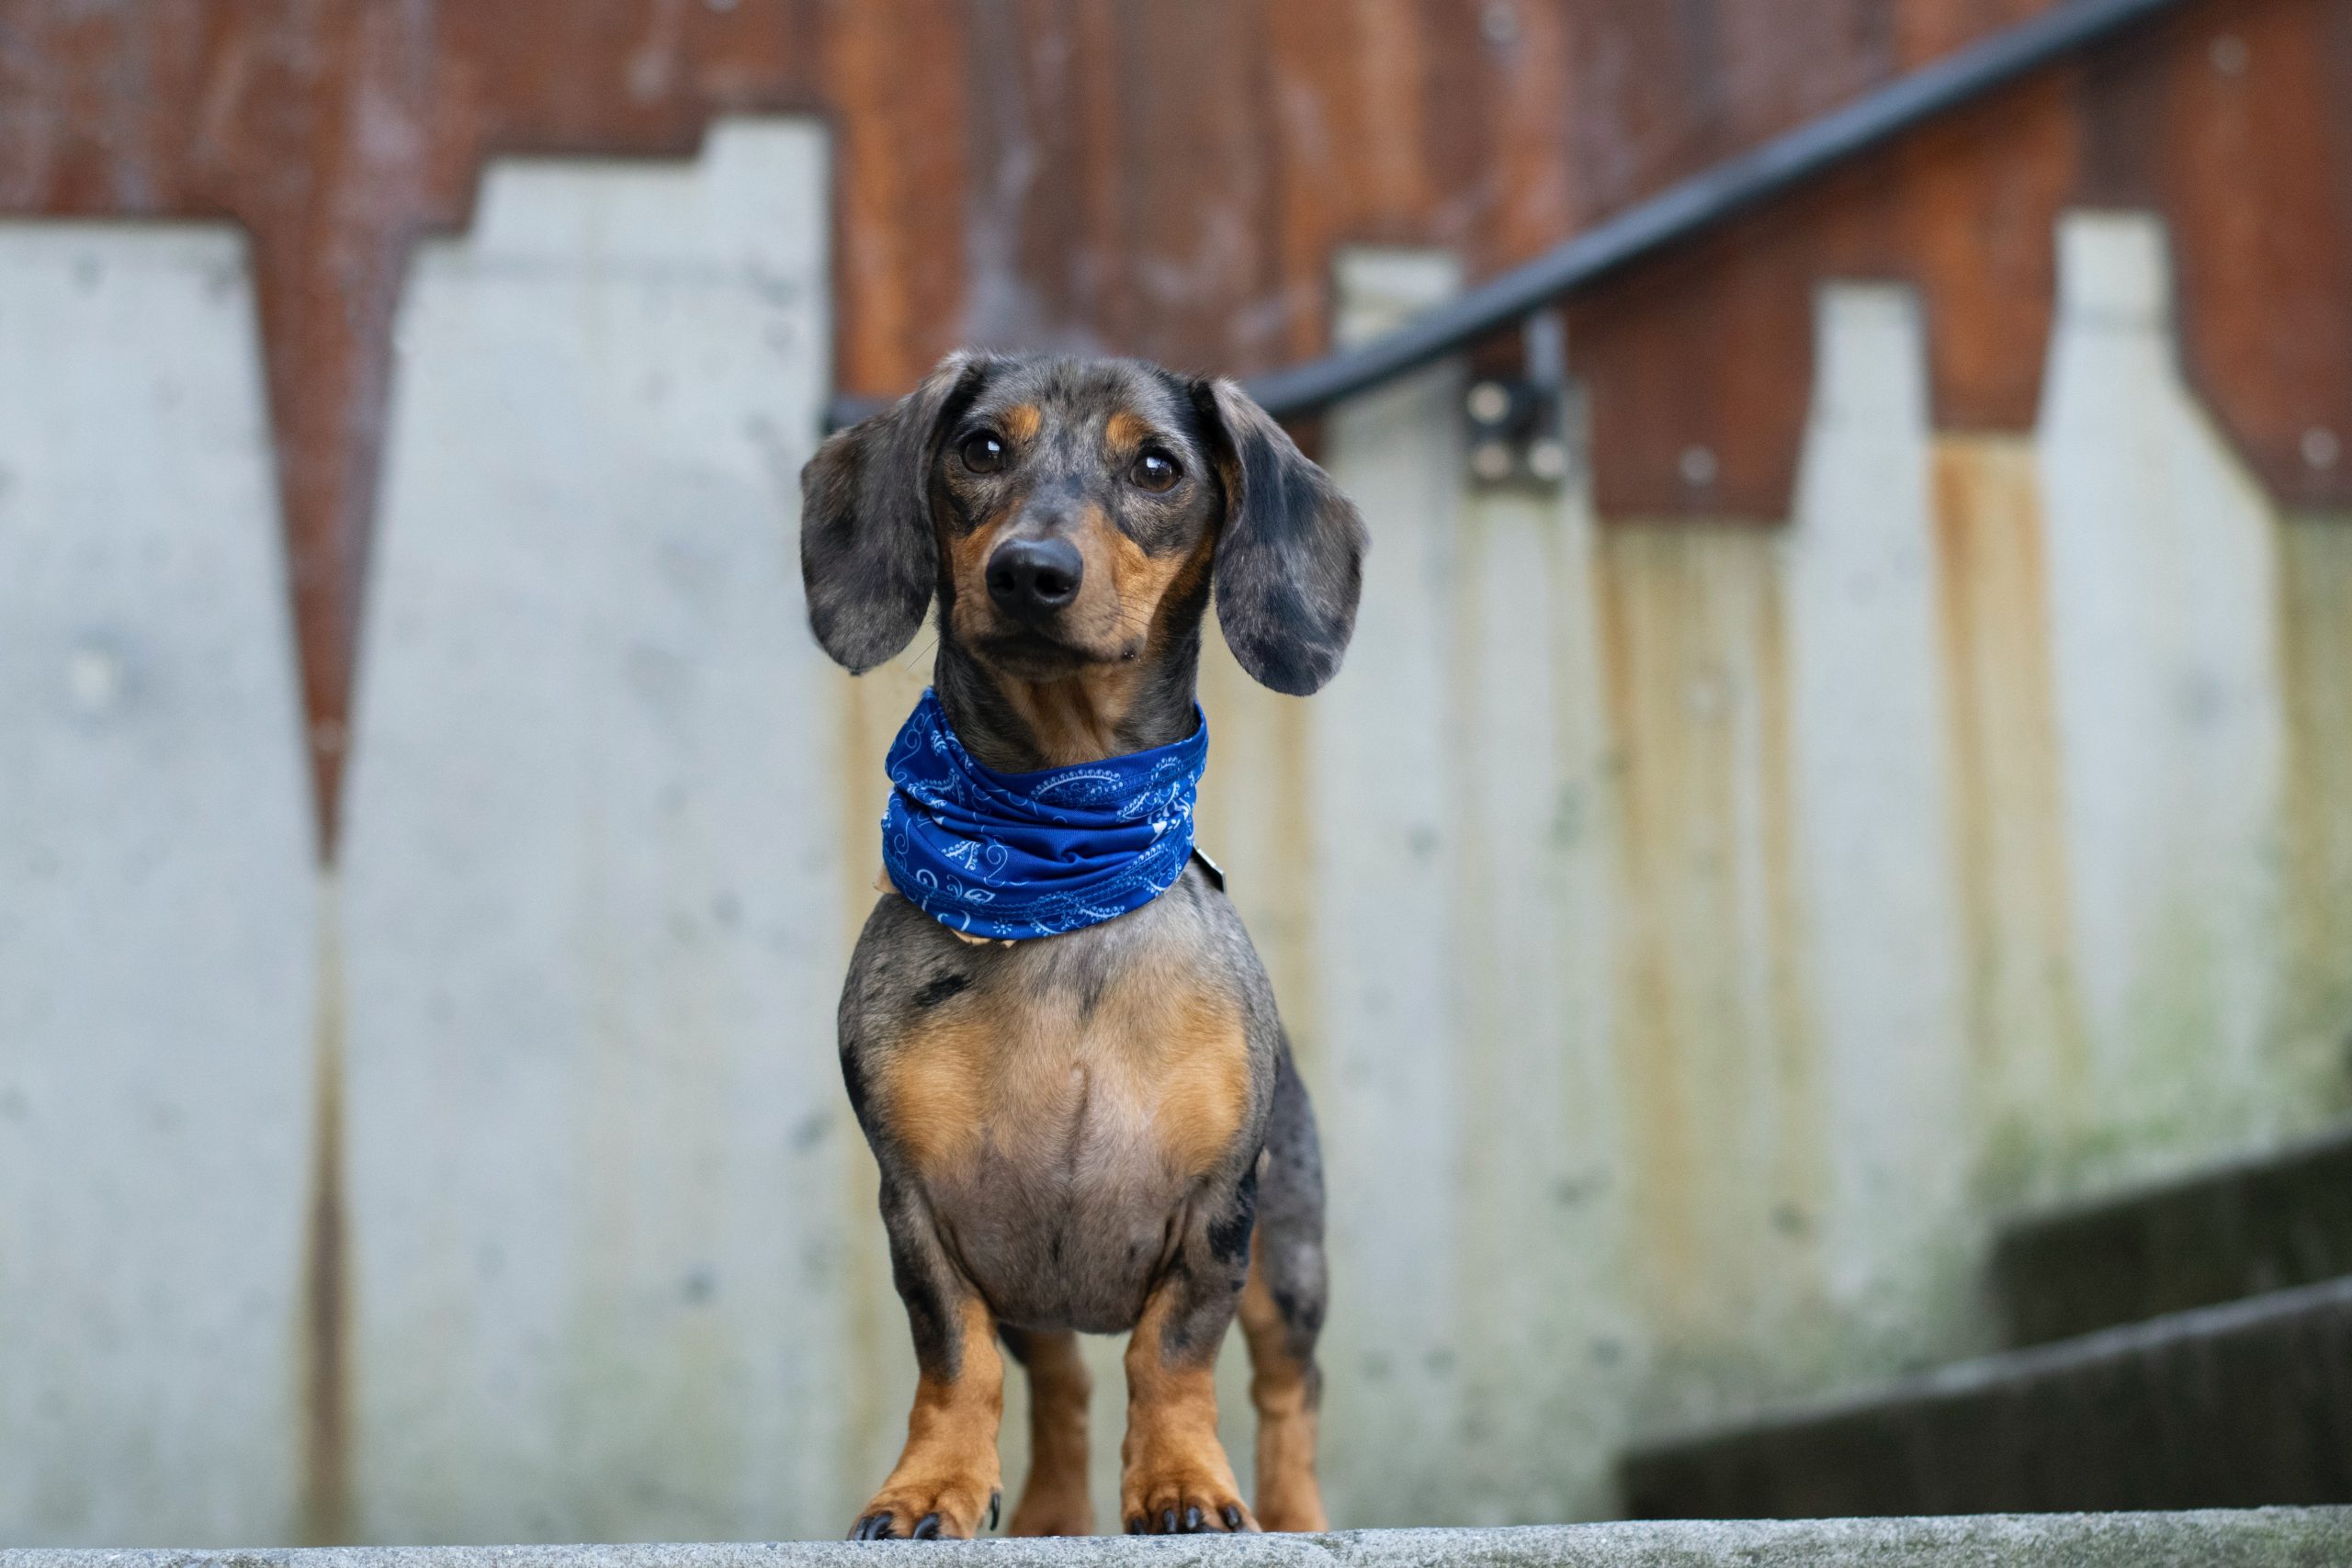 Dachshunds: The Adorable “Wiener Dogs” of the Dog Kingdom